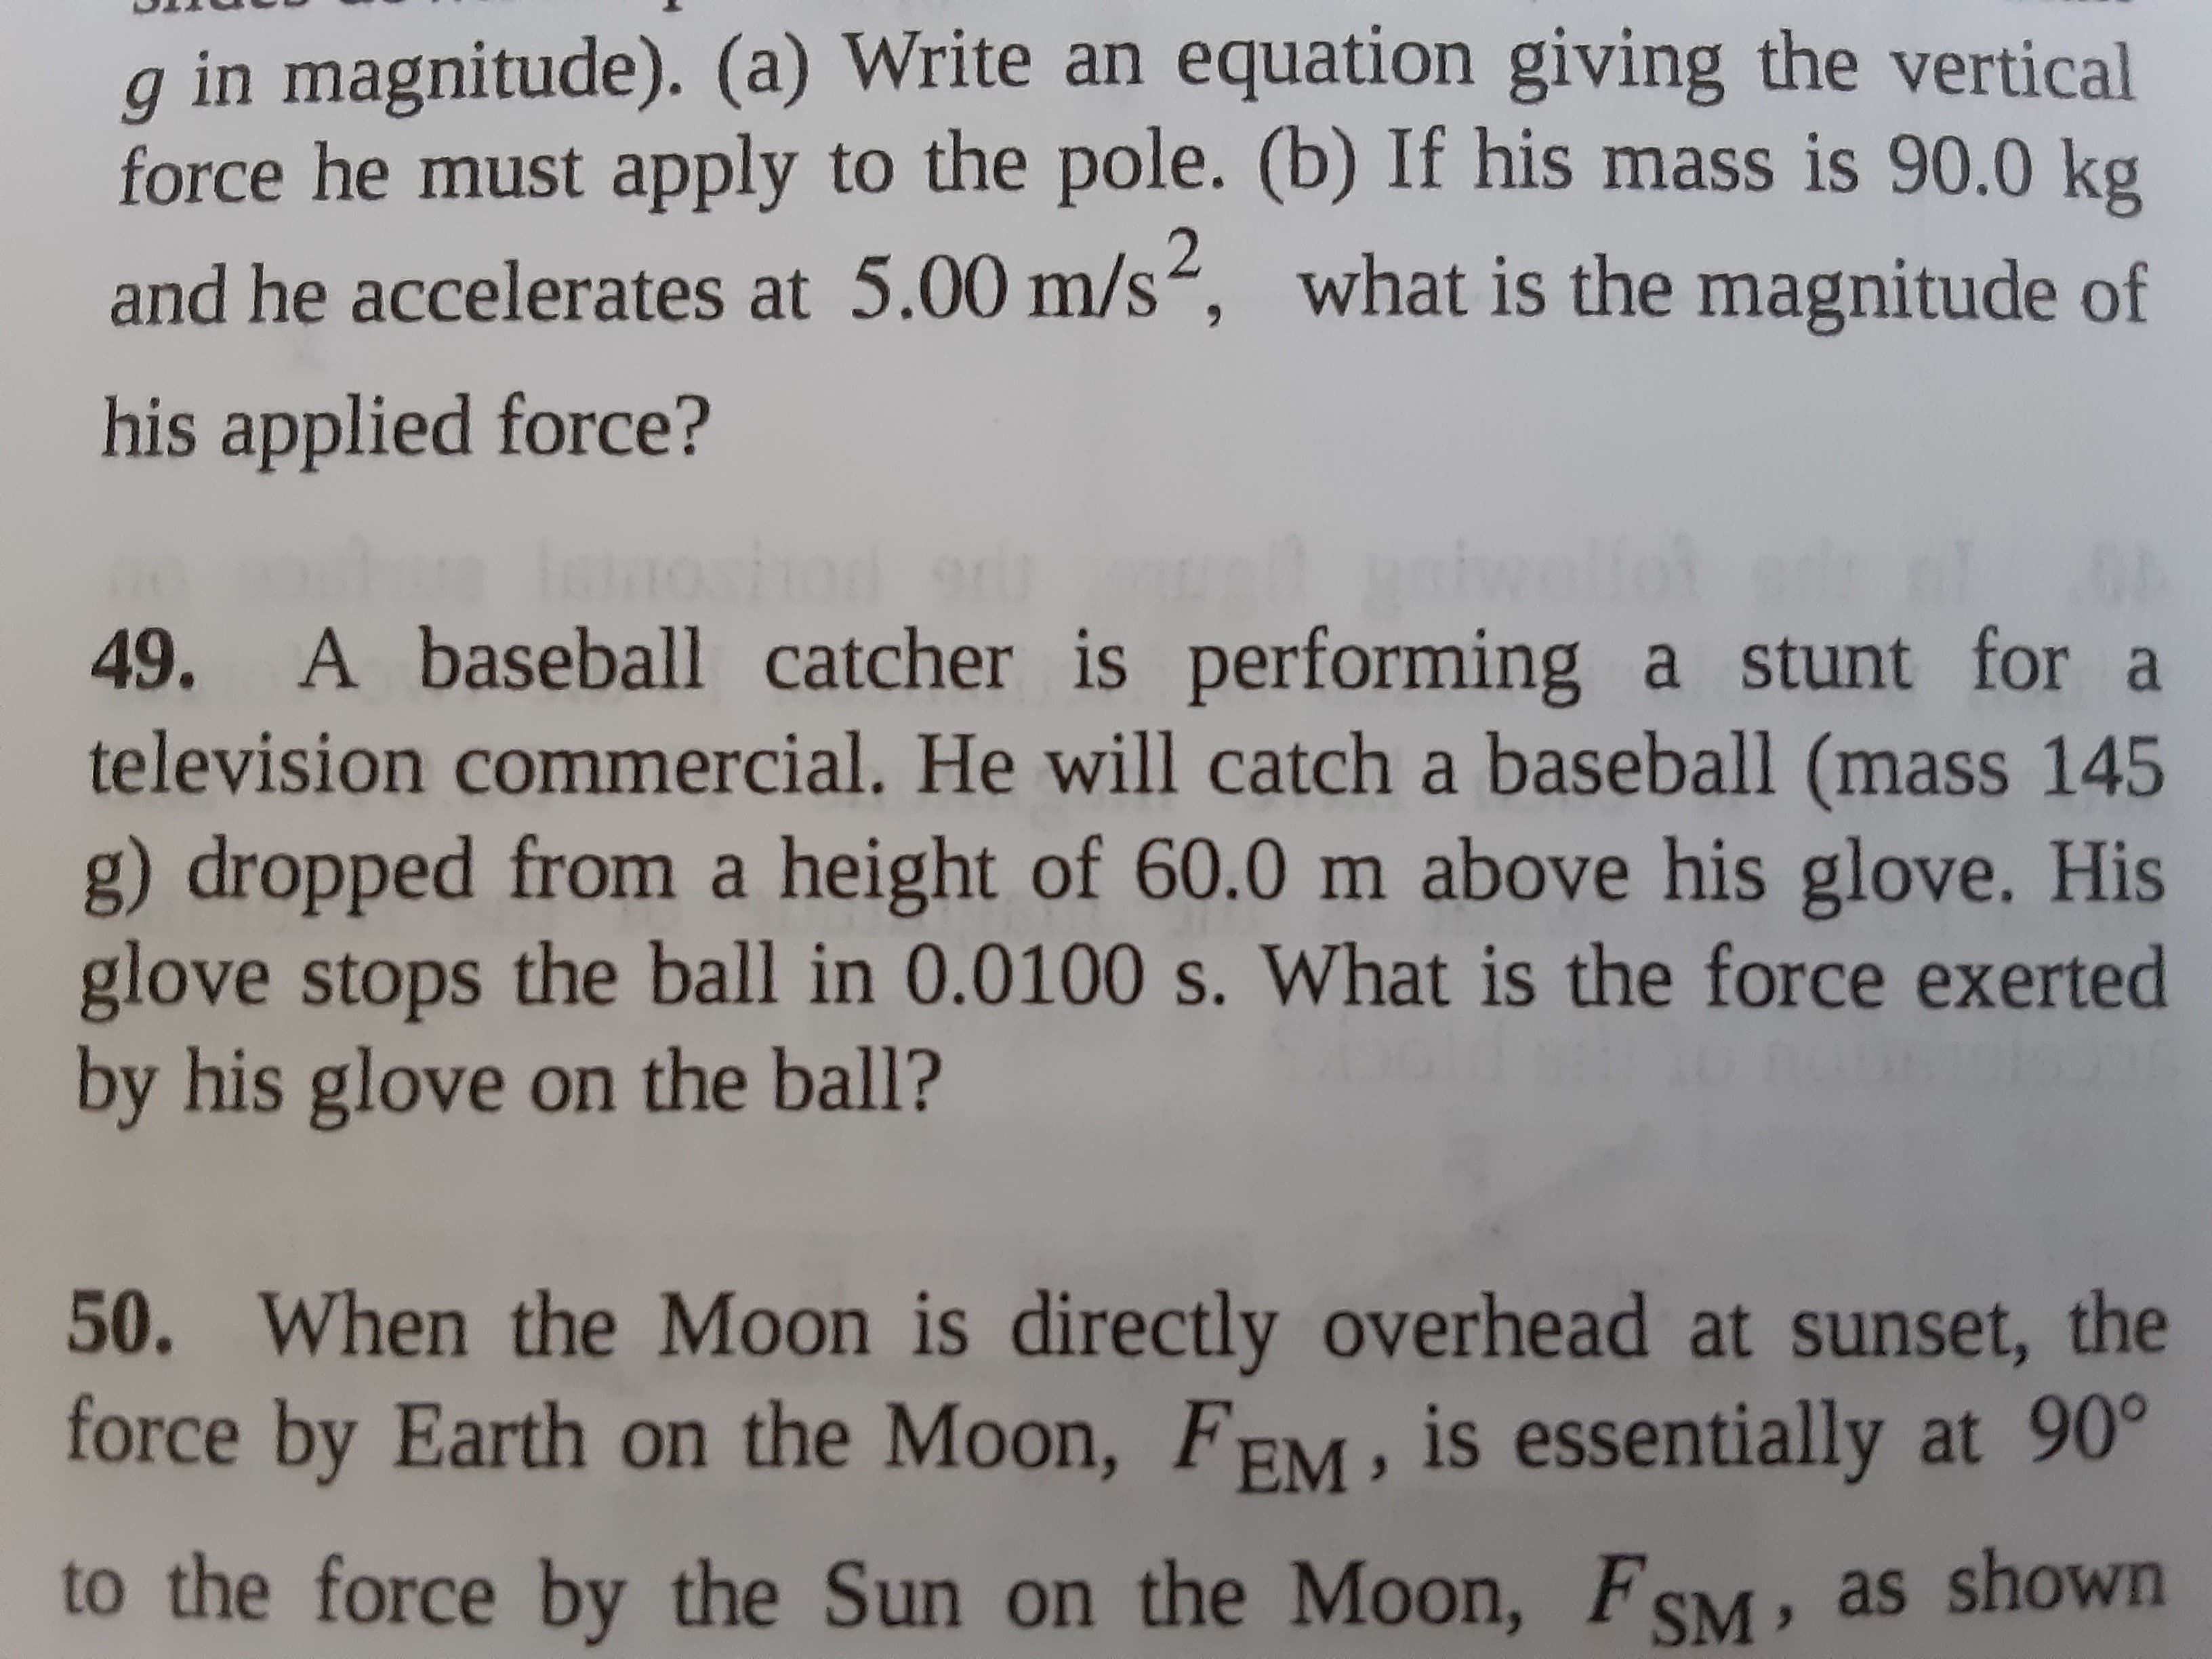 49. A baseball catcher is performing a stunt for a
television commercial. He will catch a baseball (mass 145
g) dropped from a height of 60.0 m above his glove. His
glove stops the ball in 0.0100 s. What is the force exerted
by his glove on the ball?
